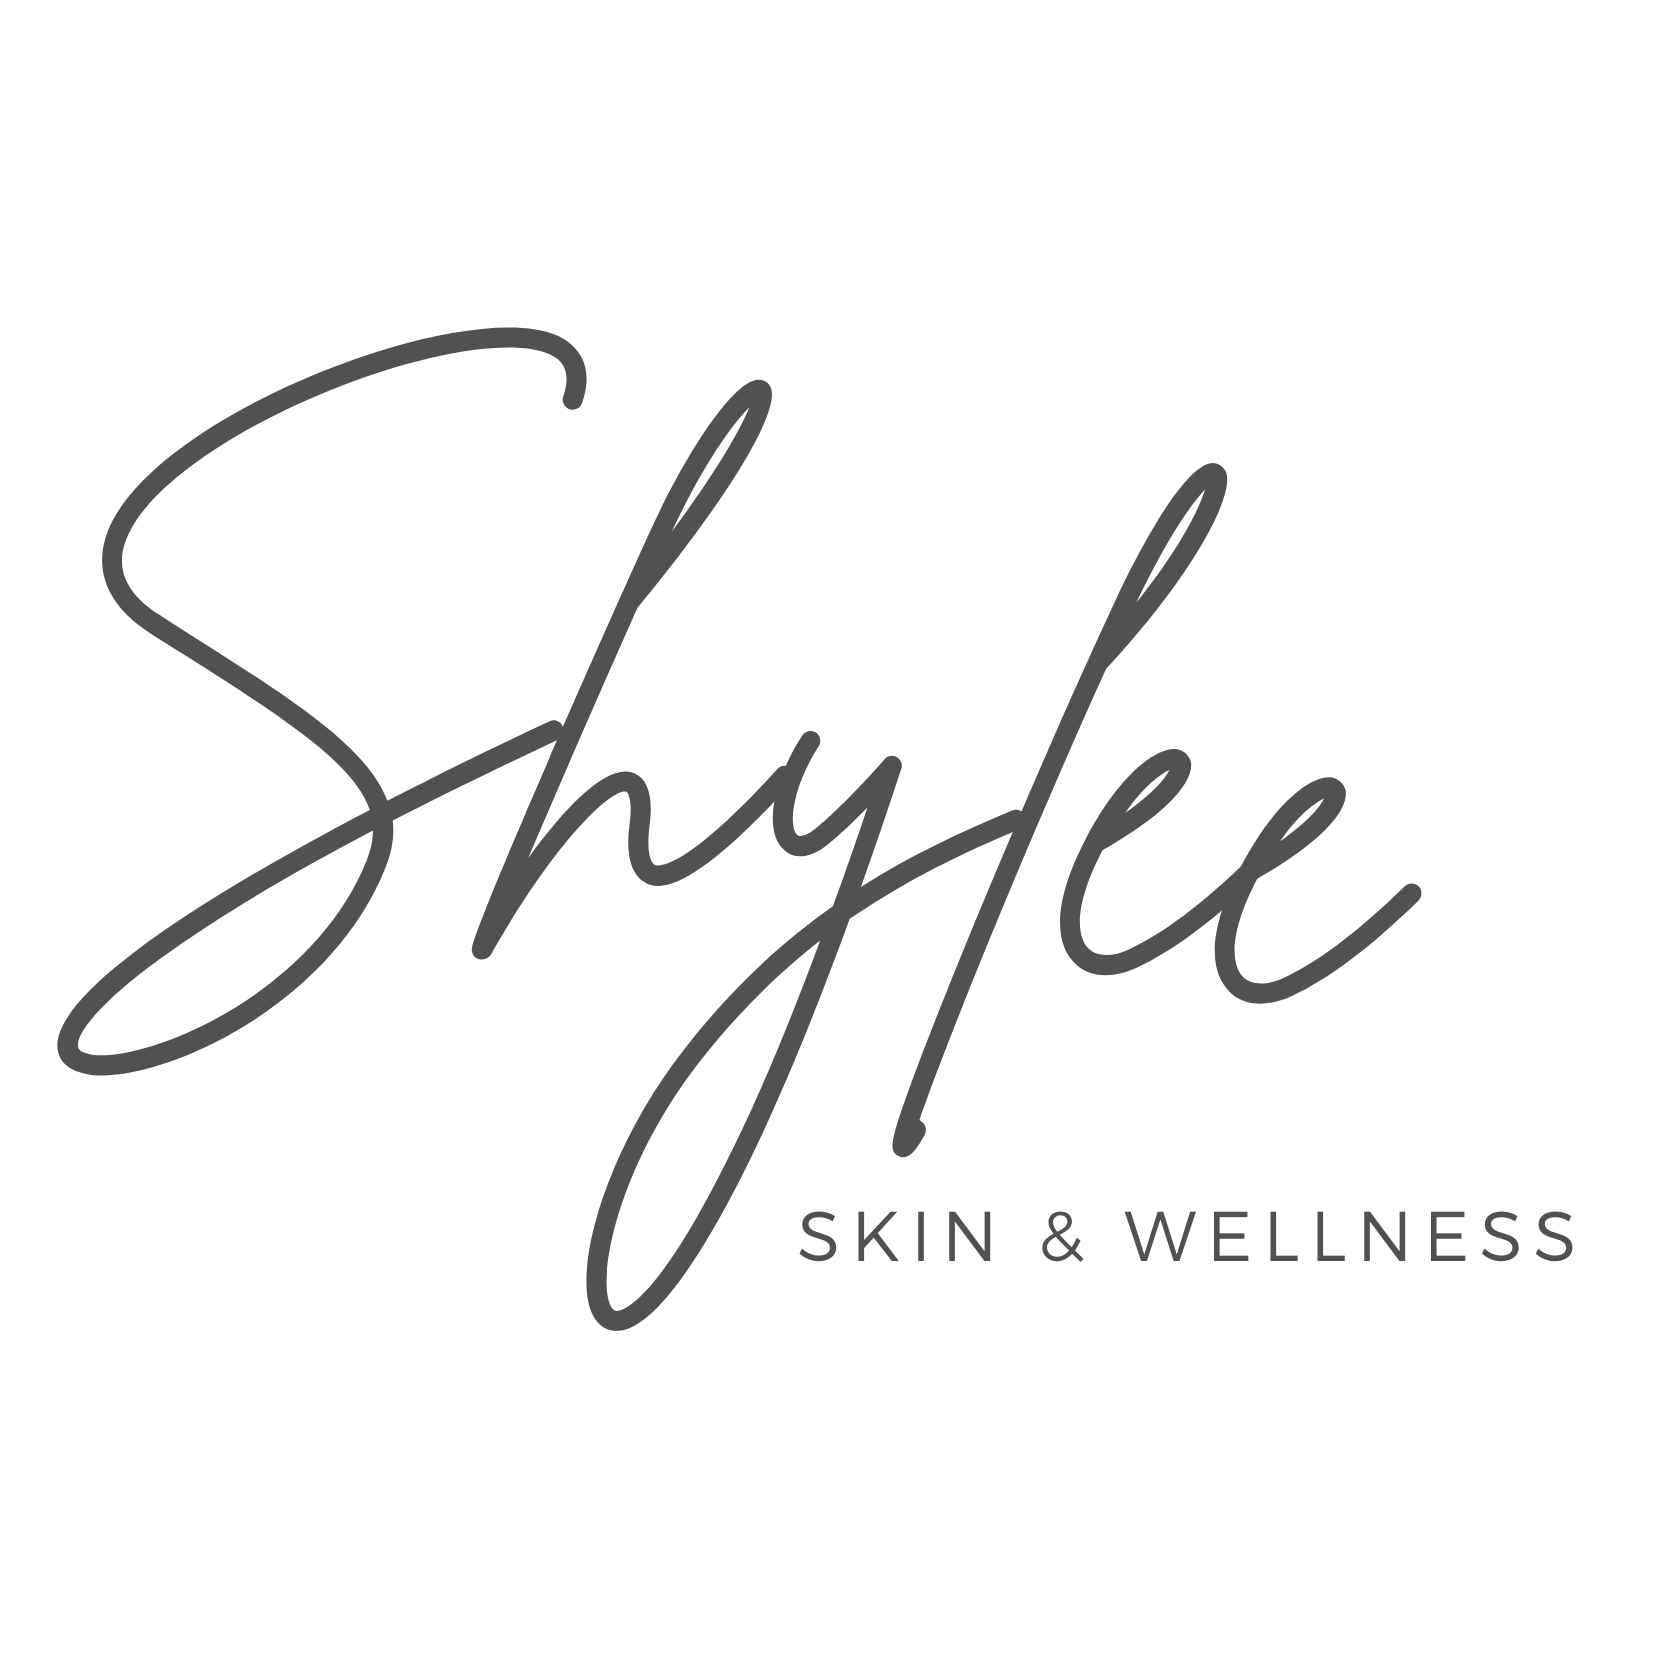 Shylee Skin and Wellness | Luxury Med Spa in Rancho Cucamonga - Body Sculpting, Coolsculpting, Facial Fillers, Lip Injections, Injectables, Vitamin Infusion, IV Therapy